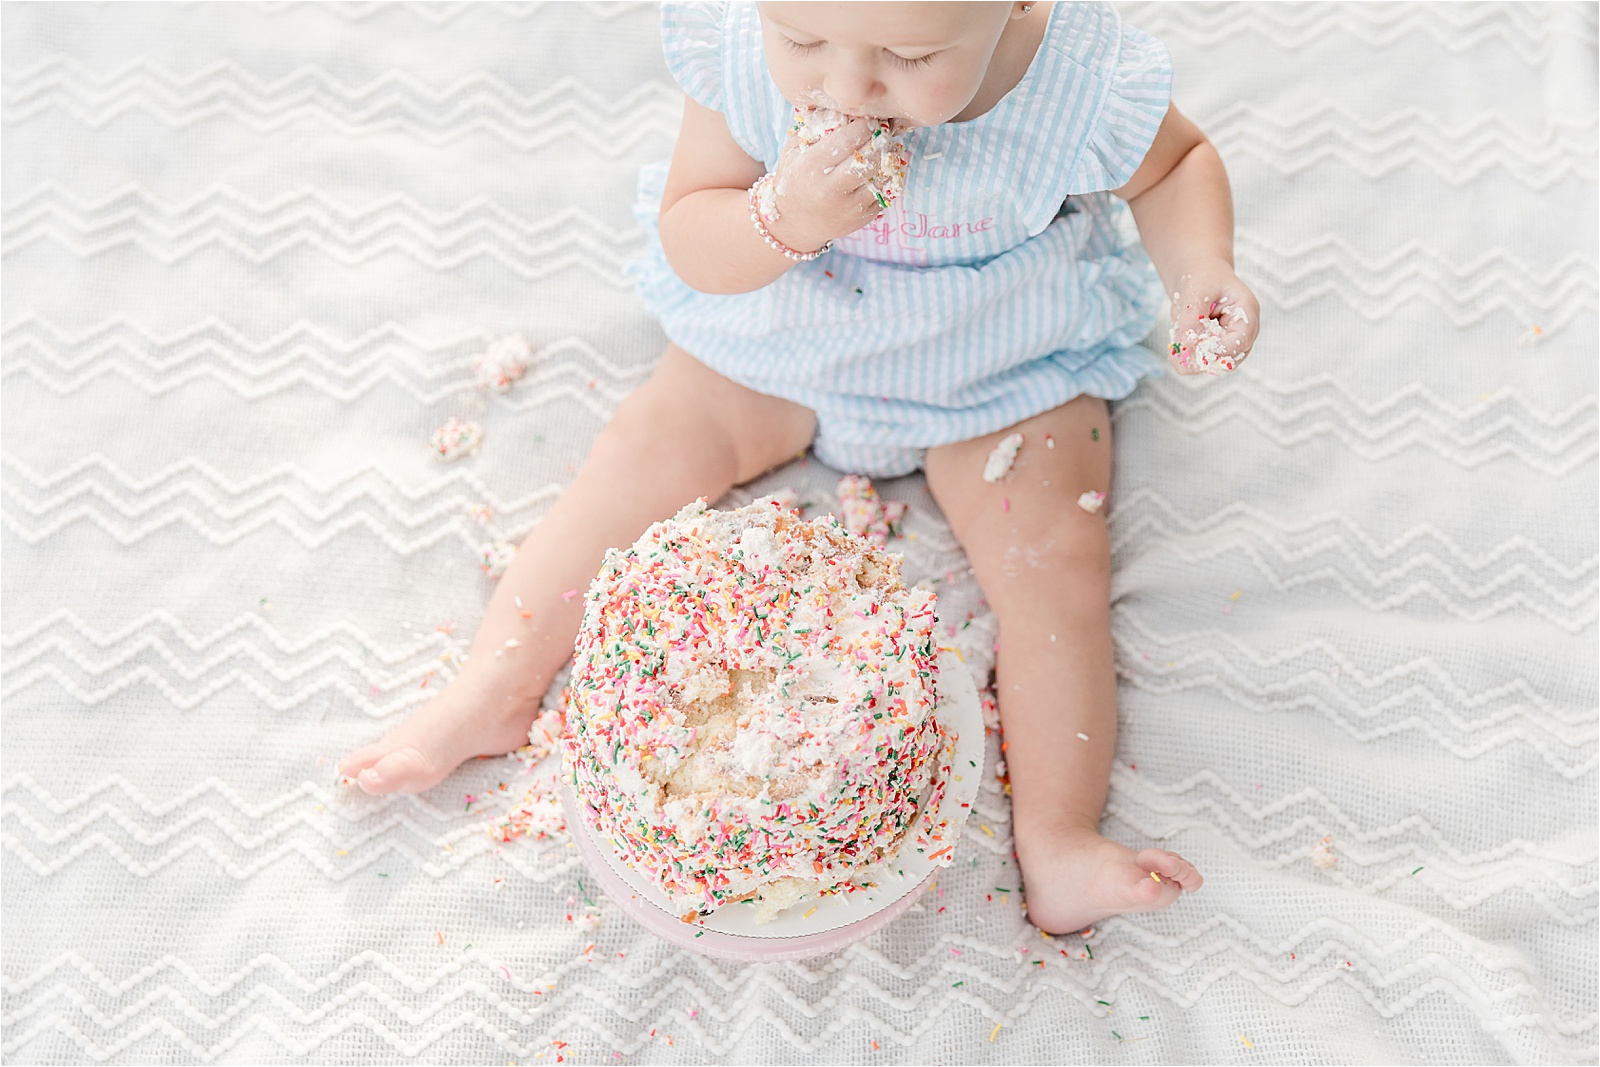 Baby eating smash cake for first birthday by photographer in greenville sc.